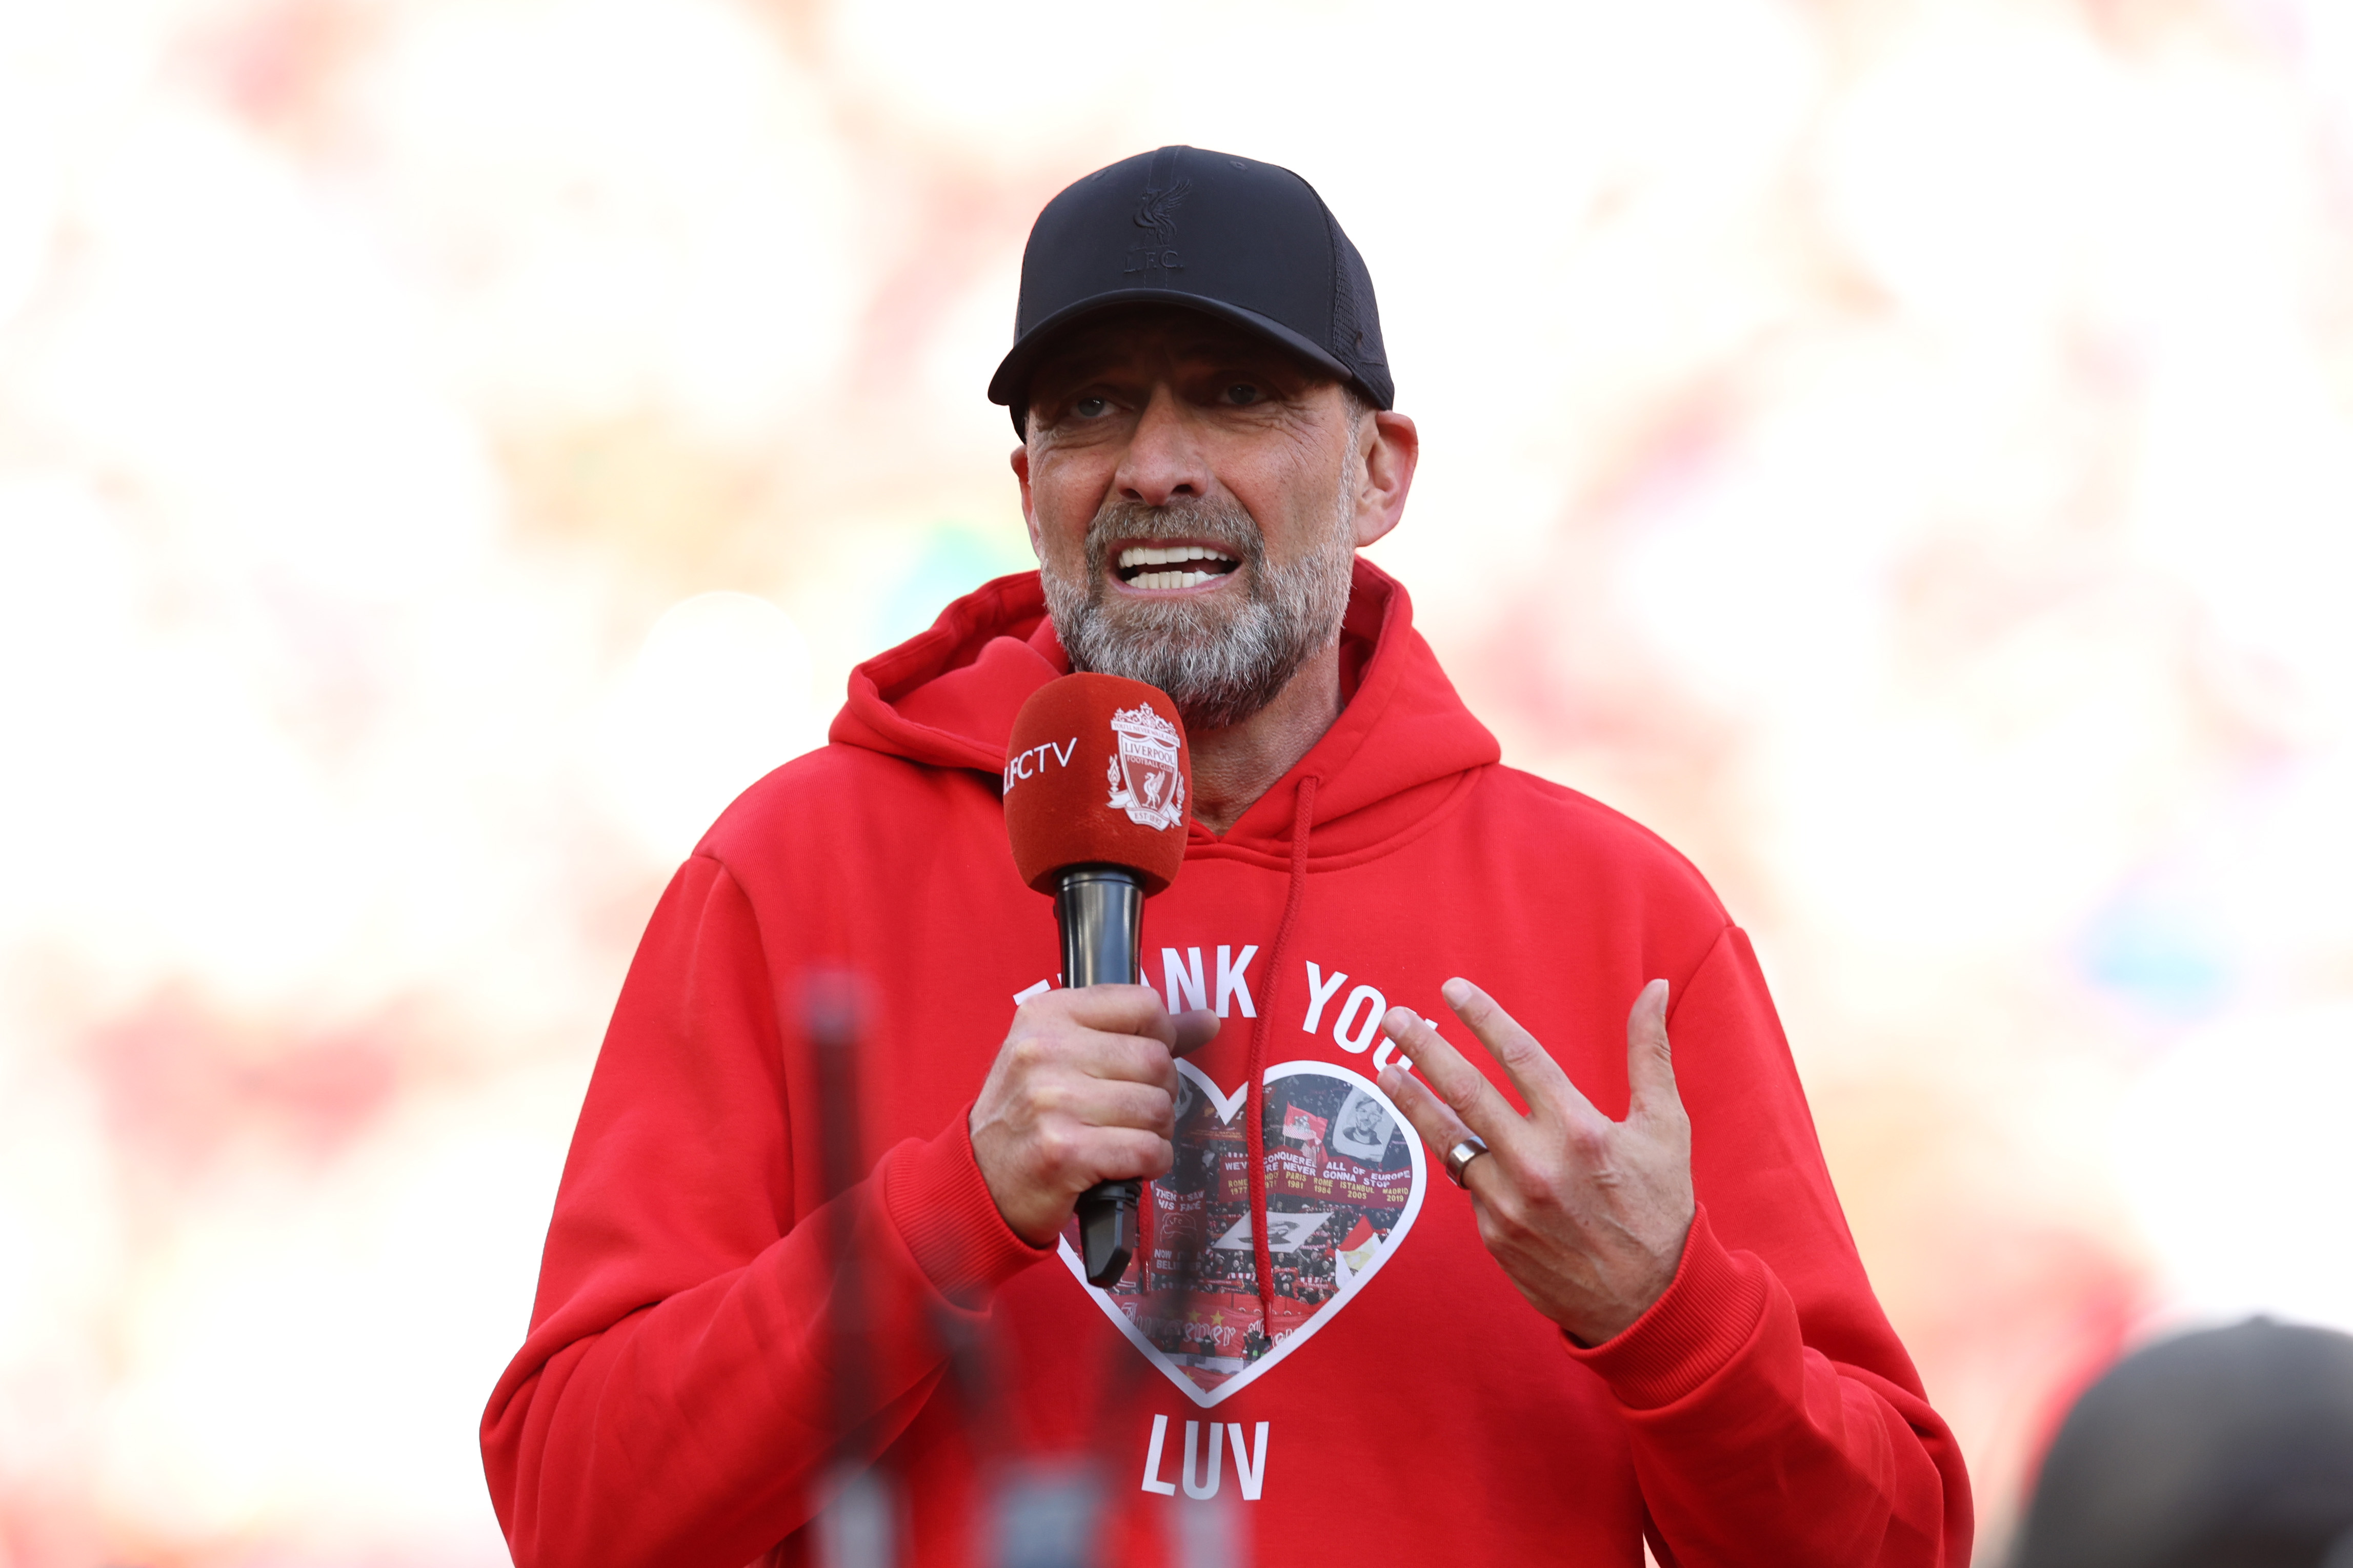 Liverpool manager Jurgen Klopp heaps praise on Pep Guardiola while having sly dig at Manchester City and co for "overspending"